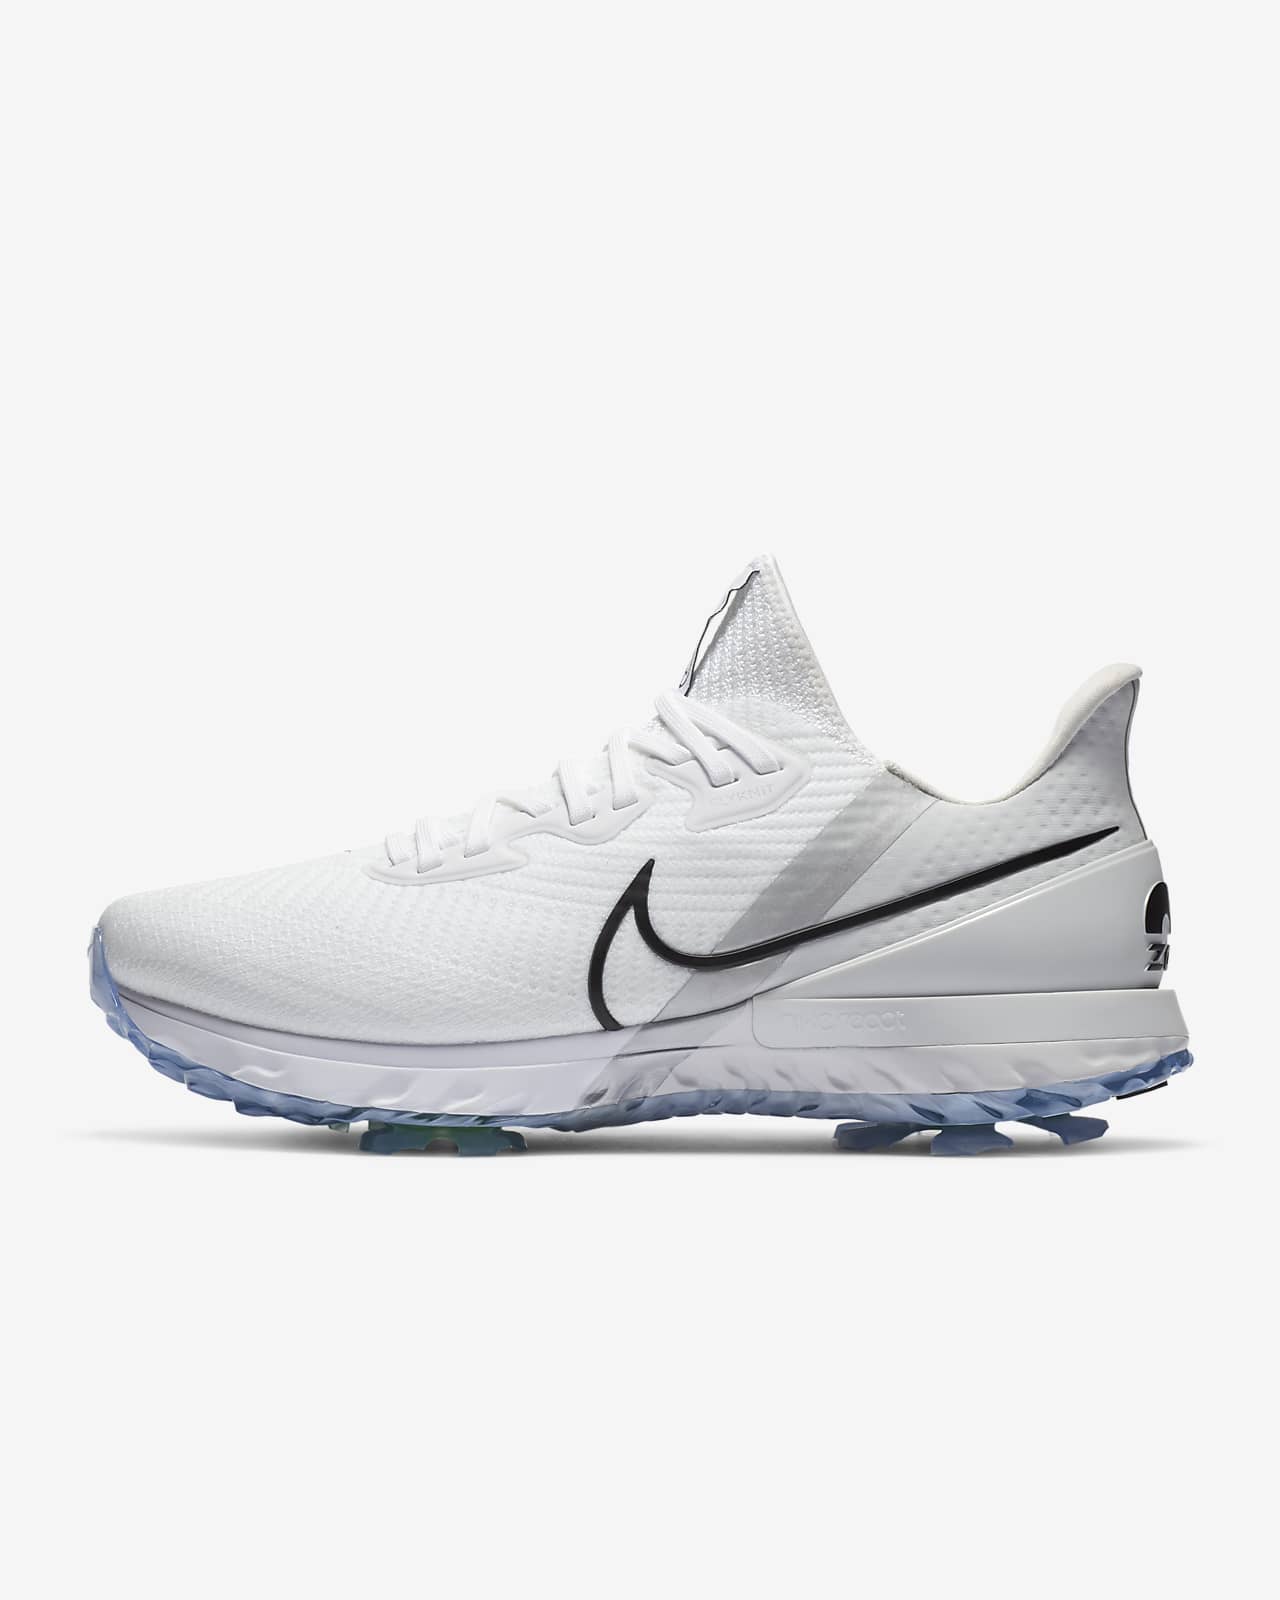 nike wide golf shoes